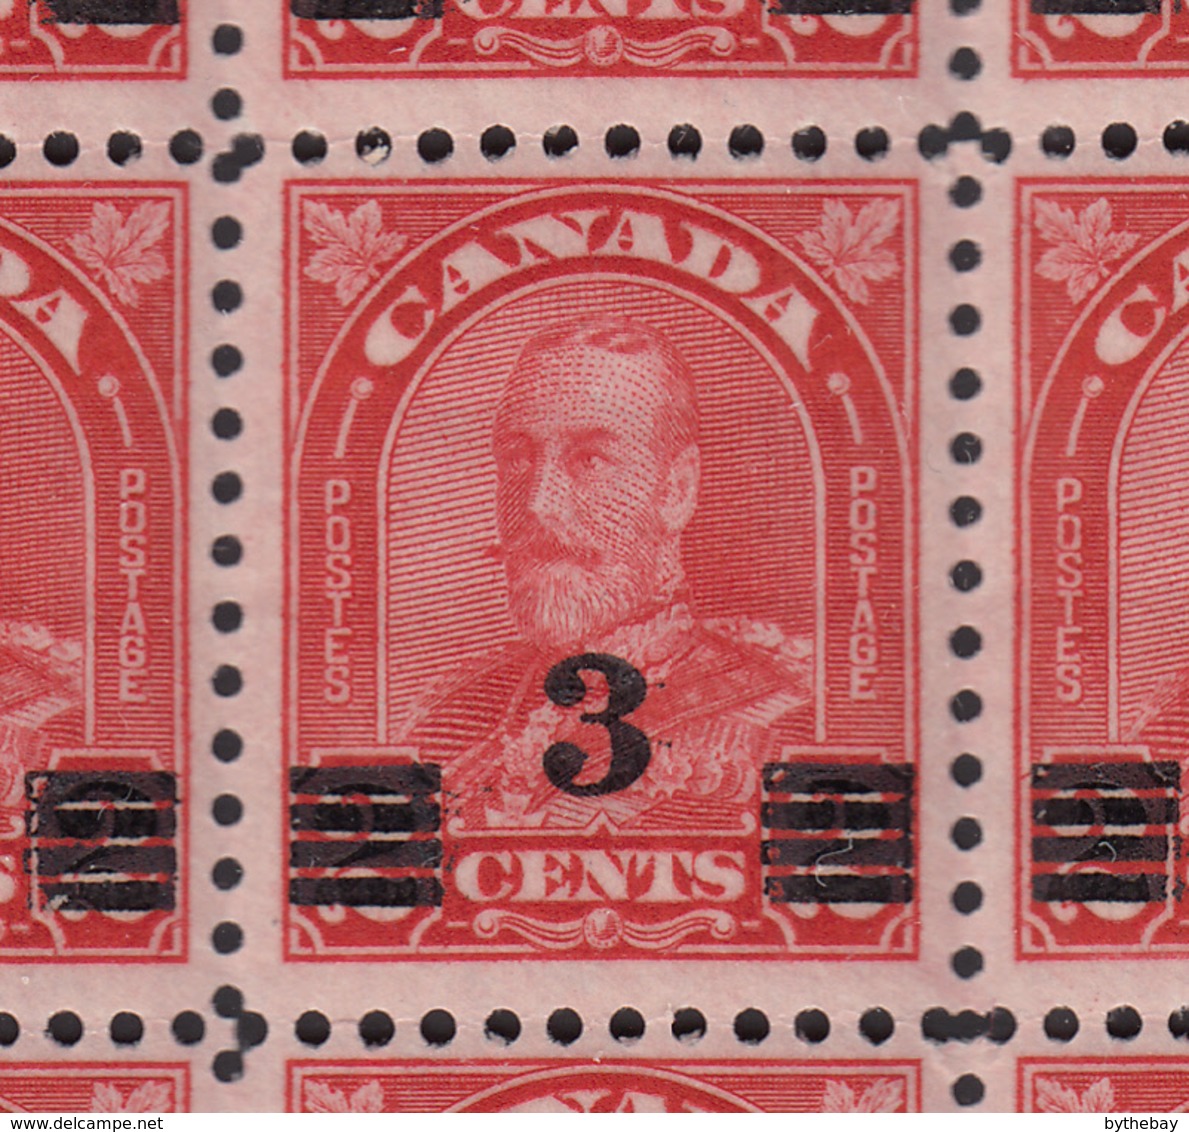 Canada Scott #191i MNH Block Of 9 With Extended Moustache Variety On Center Stamp - 3c Arch Provisional Issue - Unused Stamps